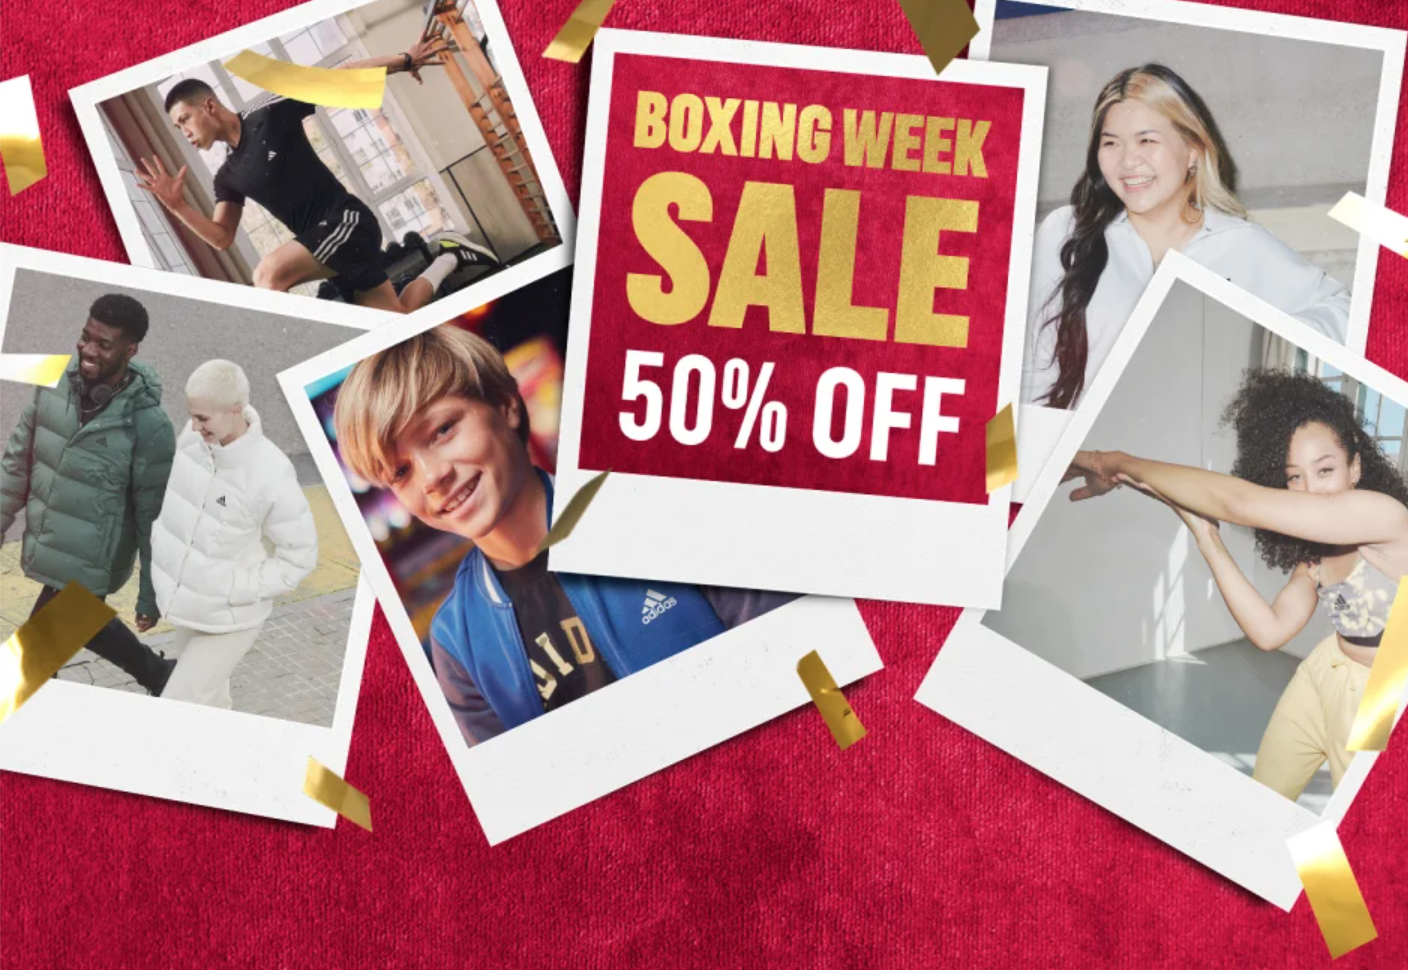 Adidas Canada Boxing Day Week Sale: Save 50% Off Sitewide, Using Coupon Code Ca - Canadian Freebies, Coupons, Deals, Bargains, Flyers, Contests Canada Canadian Freebies, Coupons, Bargains, Flyers, Canada